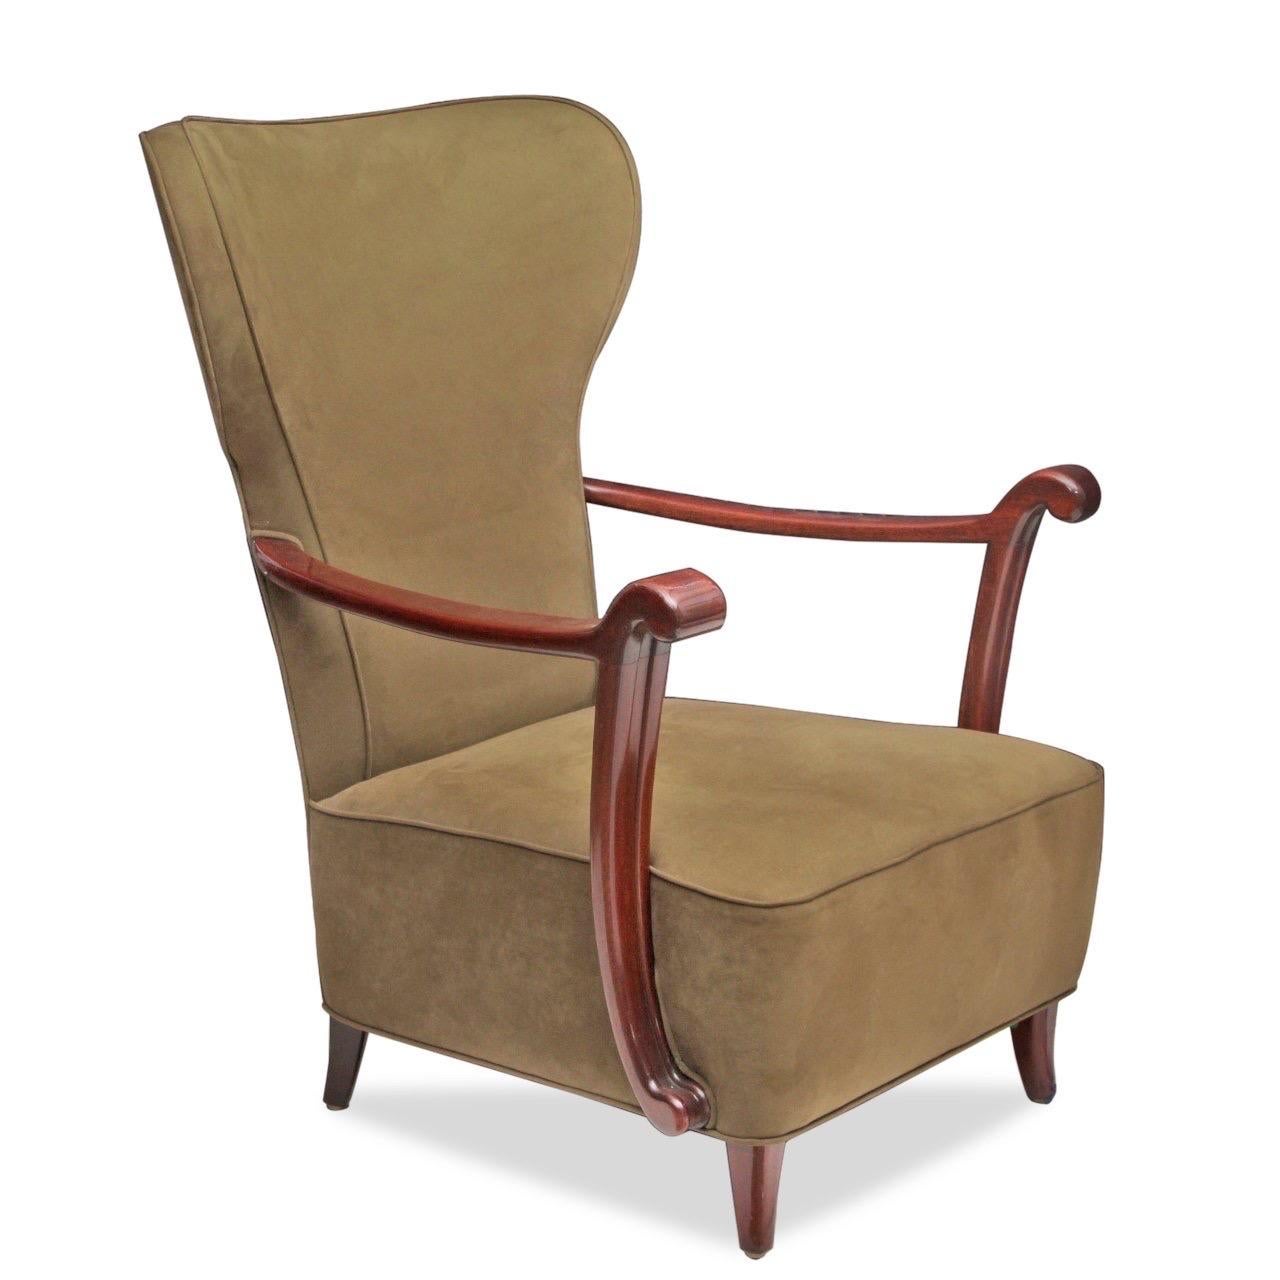 Vintage Italian Midcentury Wingback Chairs, a pair In Good Condition For Sale In New York, NY